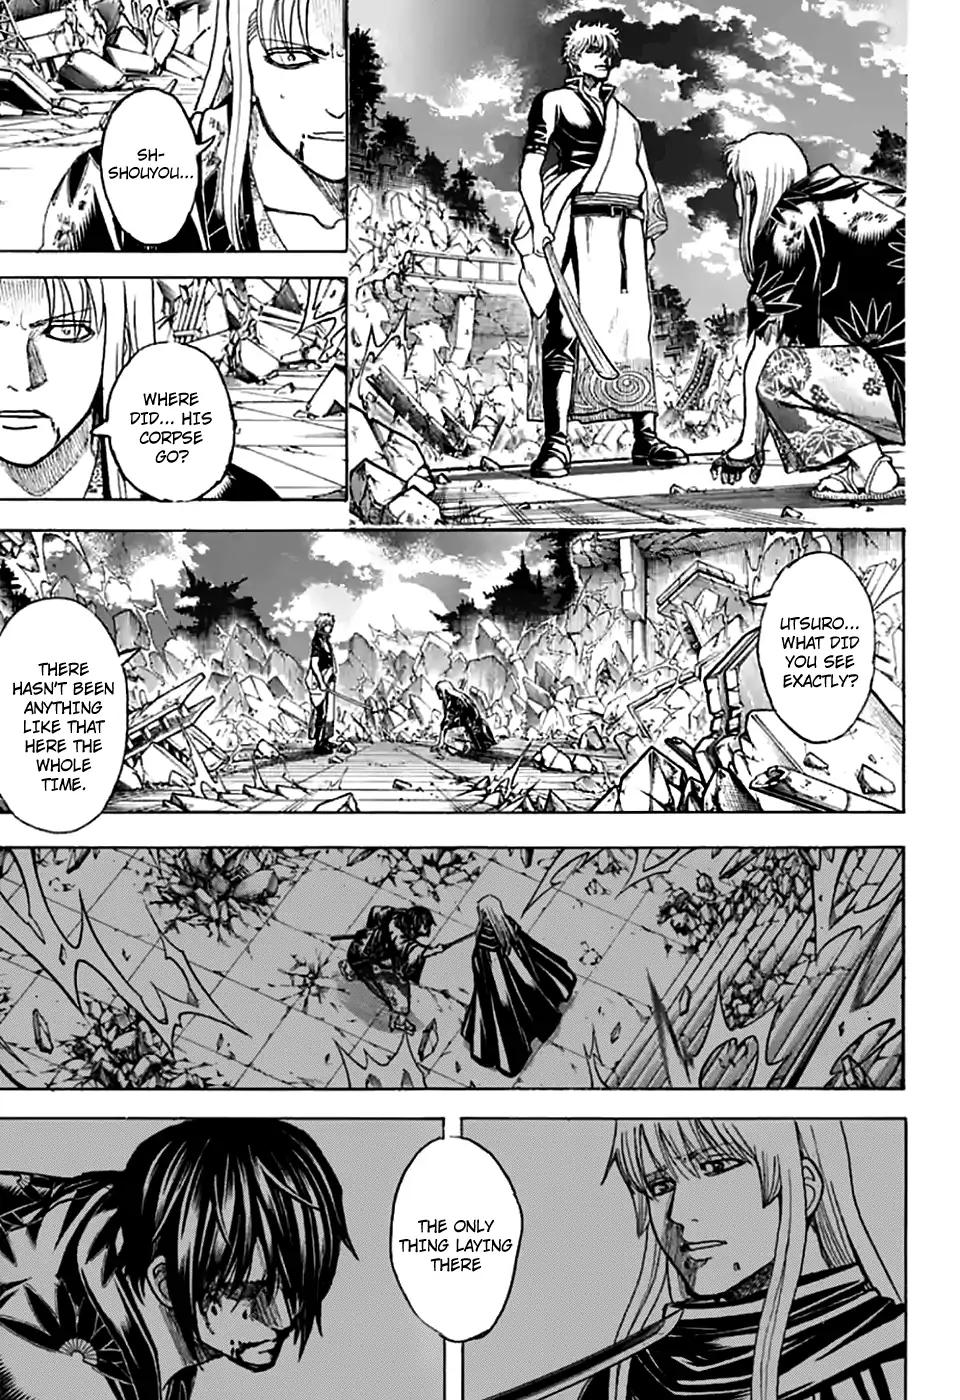 Gintama chapter 703 page 11